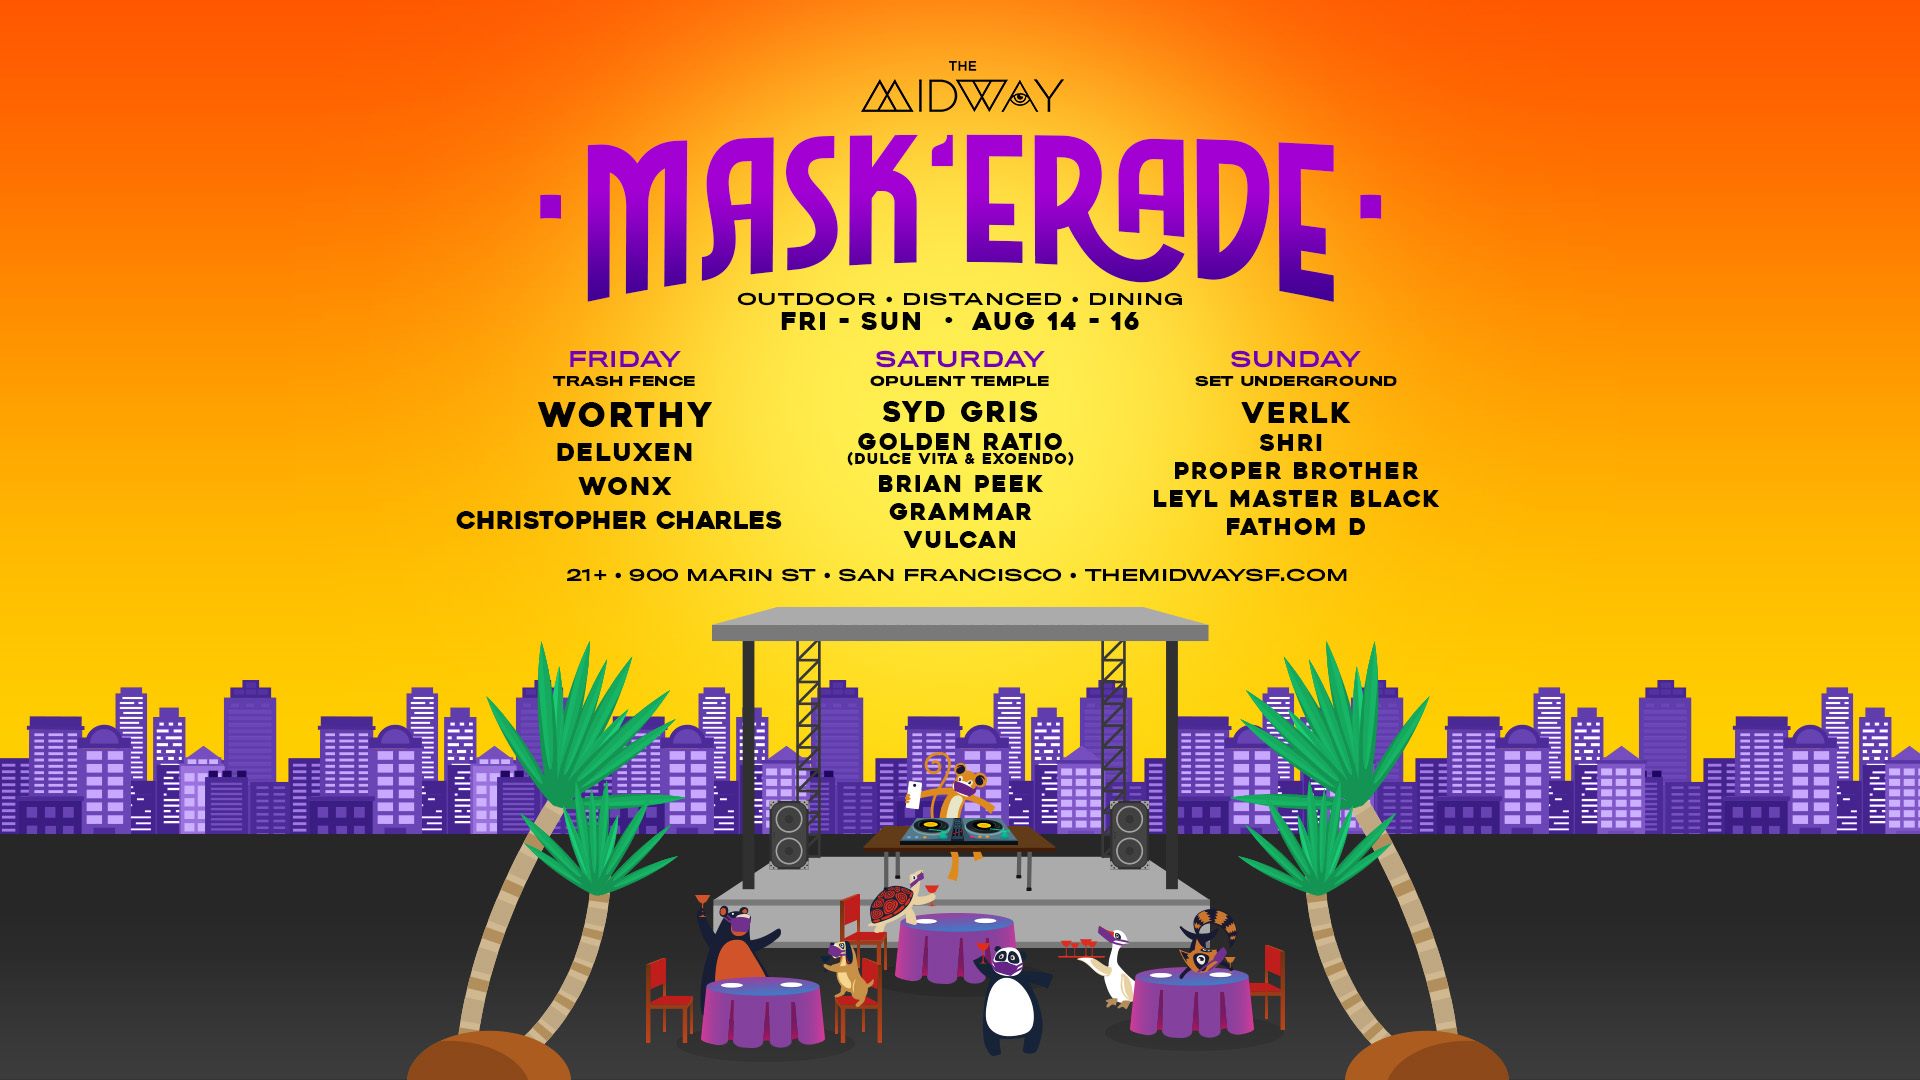 The Mask’erade: 3 Days of Outdoor Dining This Weekend 2020